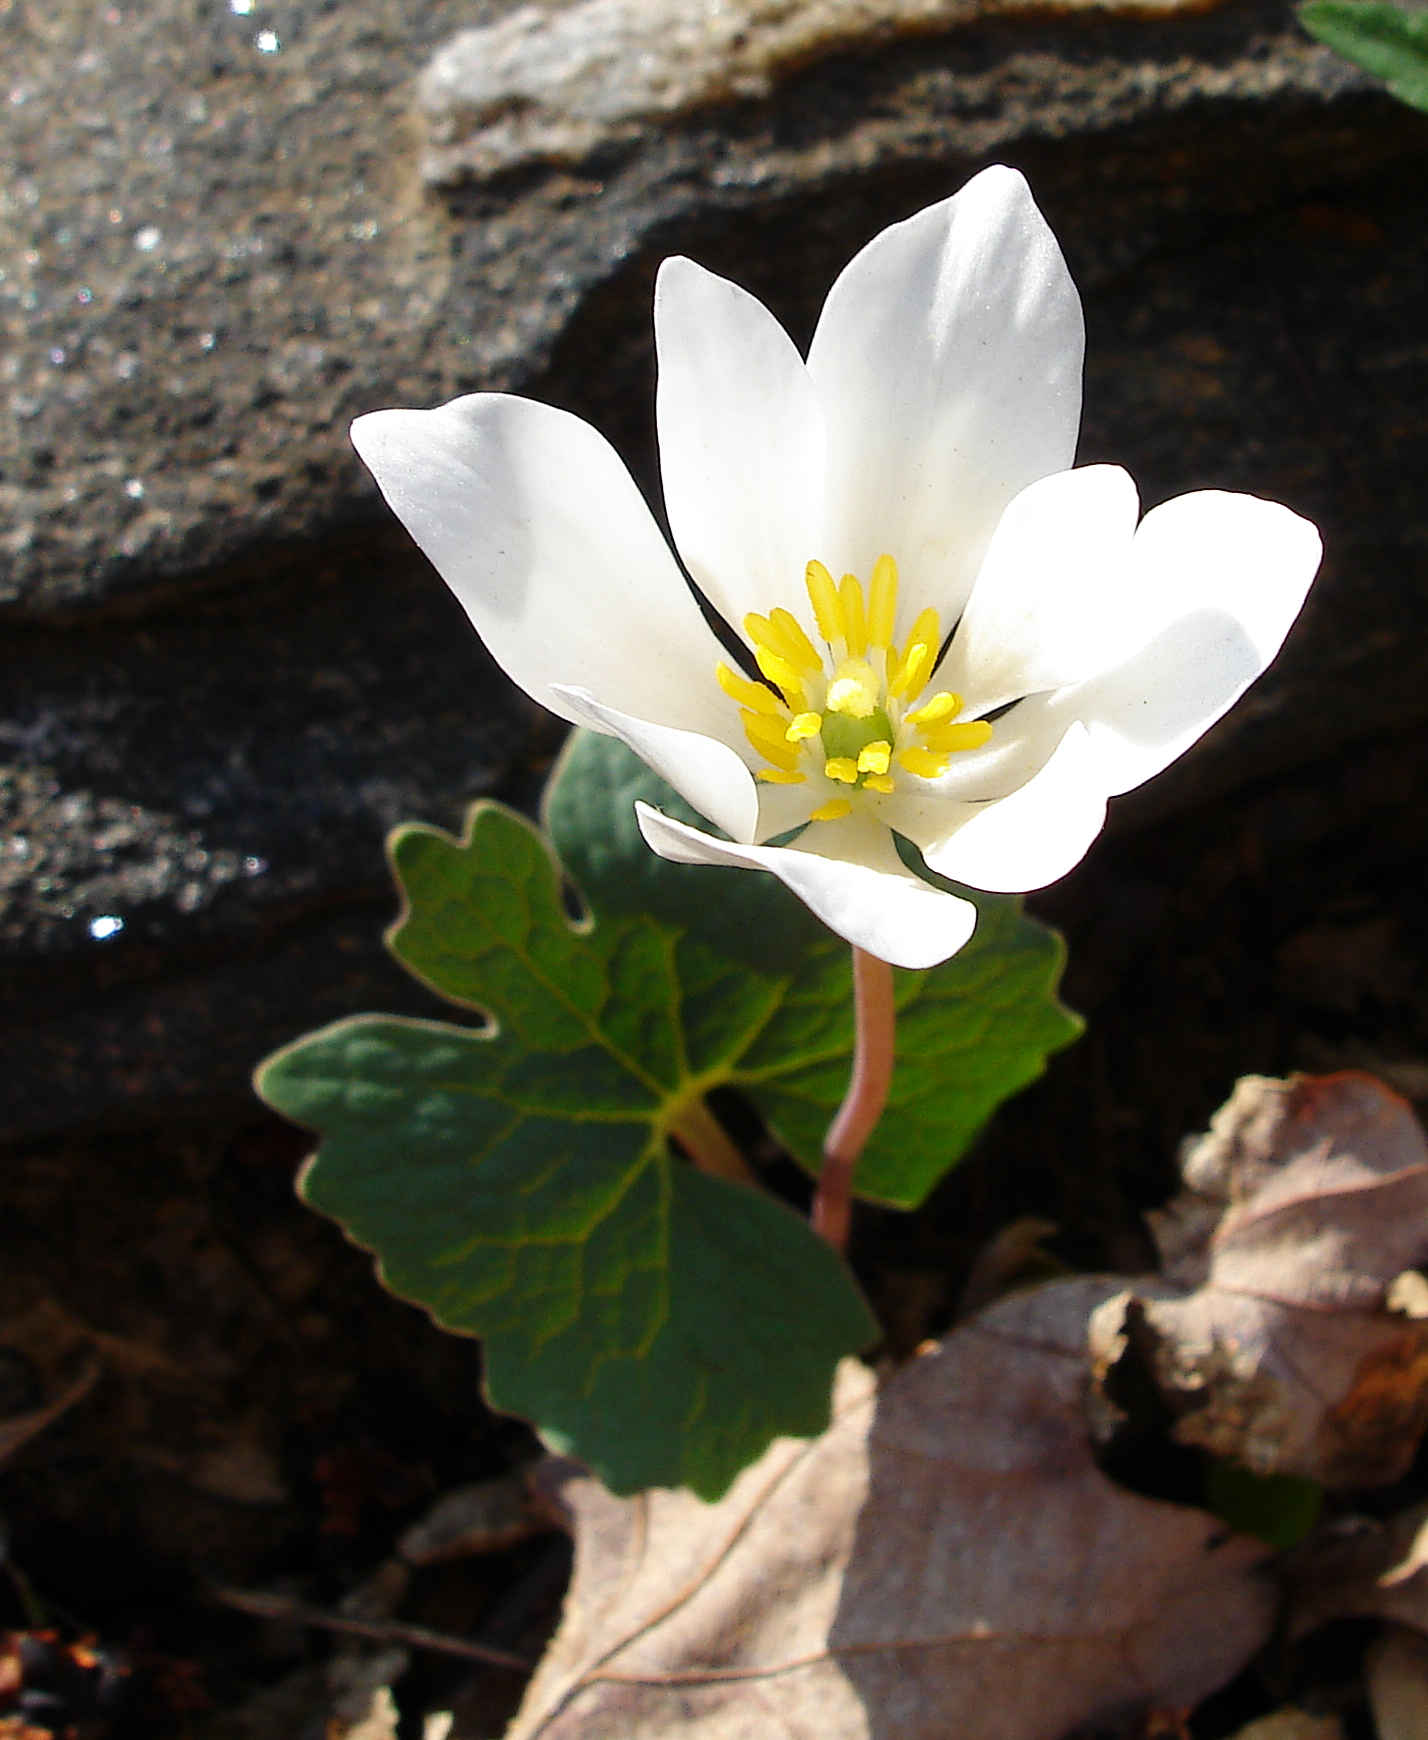 bloodroot flower pics4learning